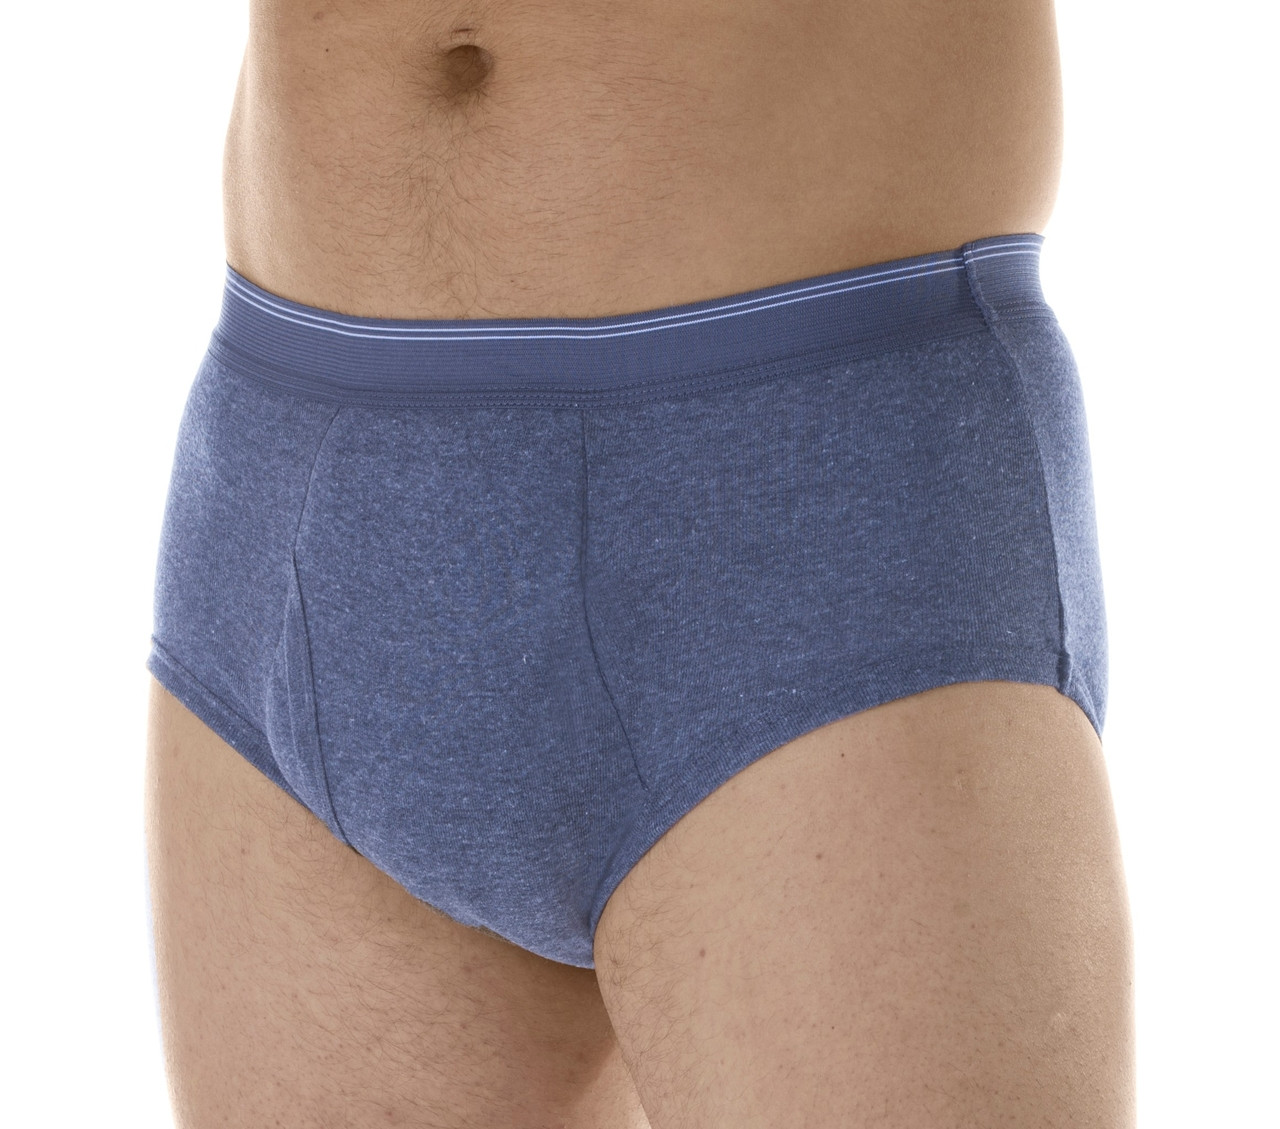 Men's Washable Incontinence Boxer Shorts (with built in pad)